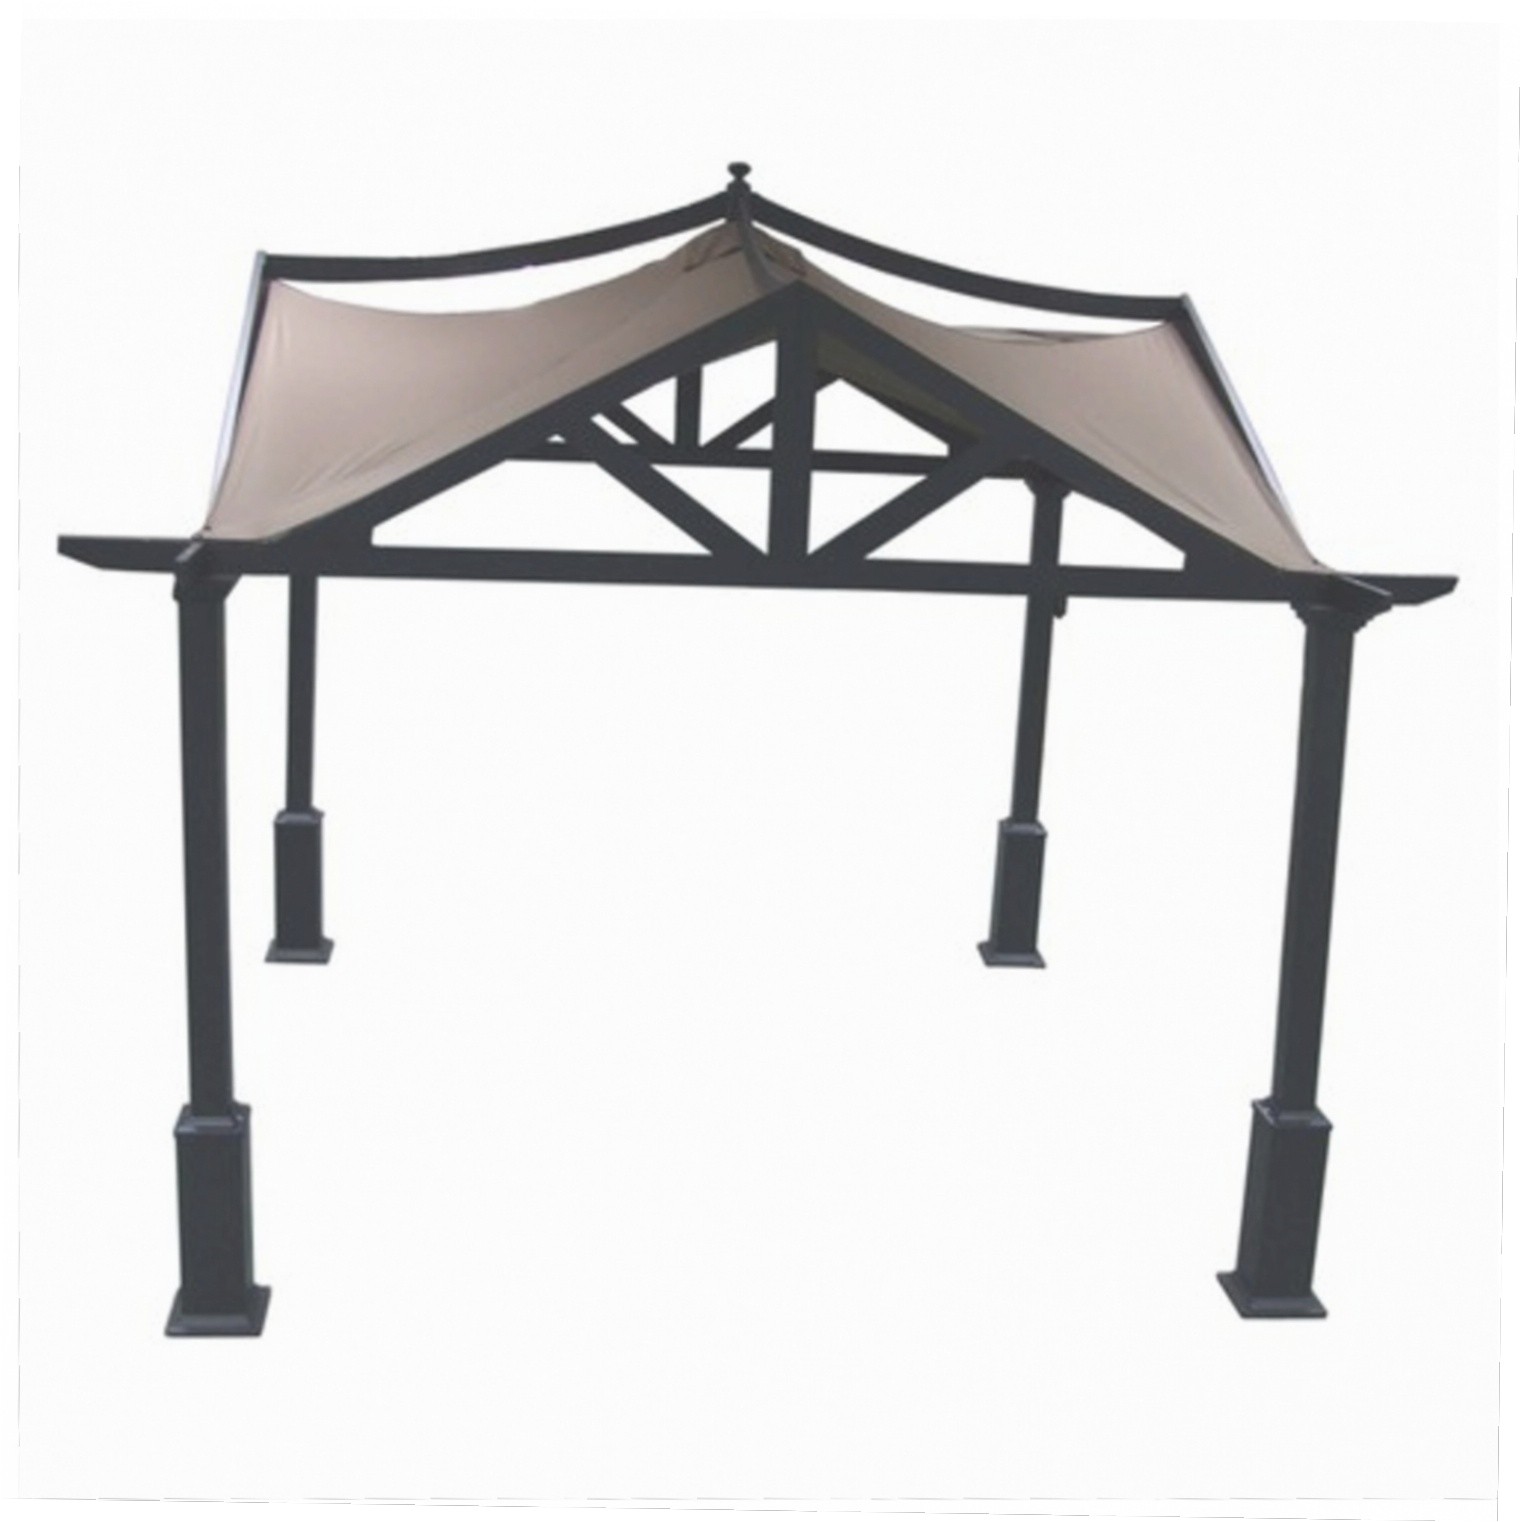 allen roth gazebo replacement parts